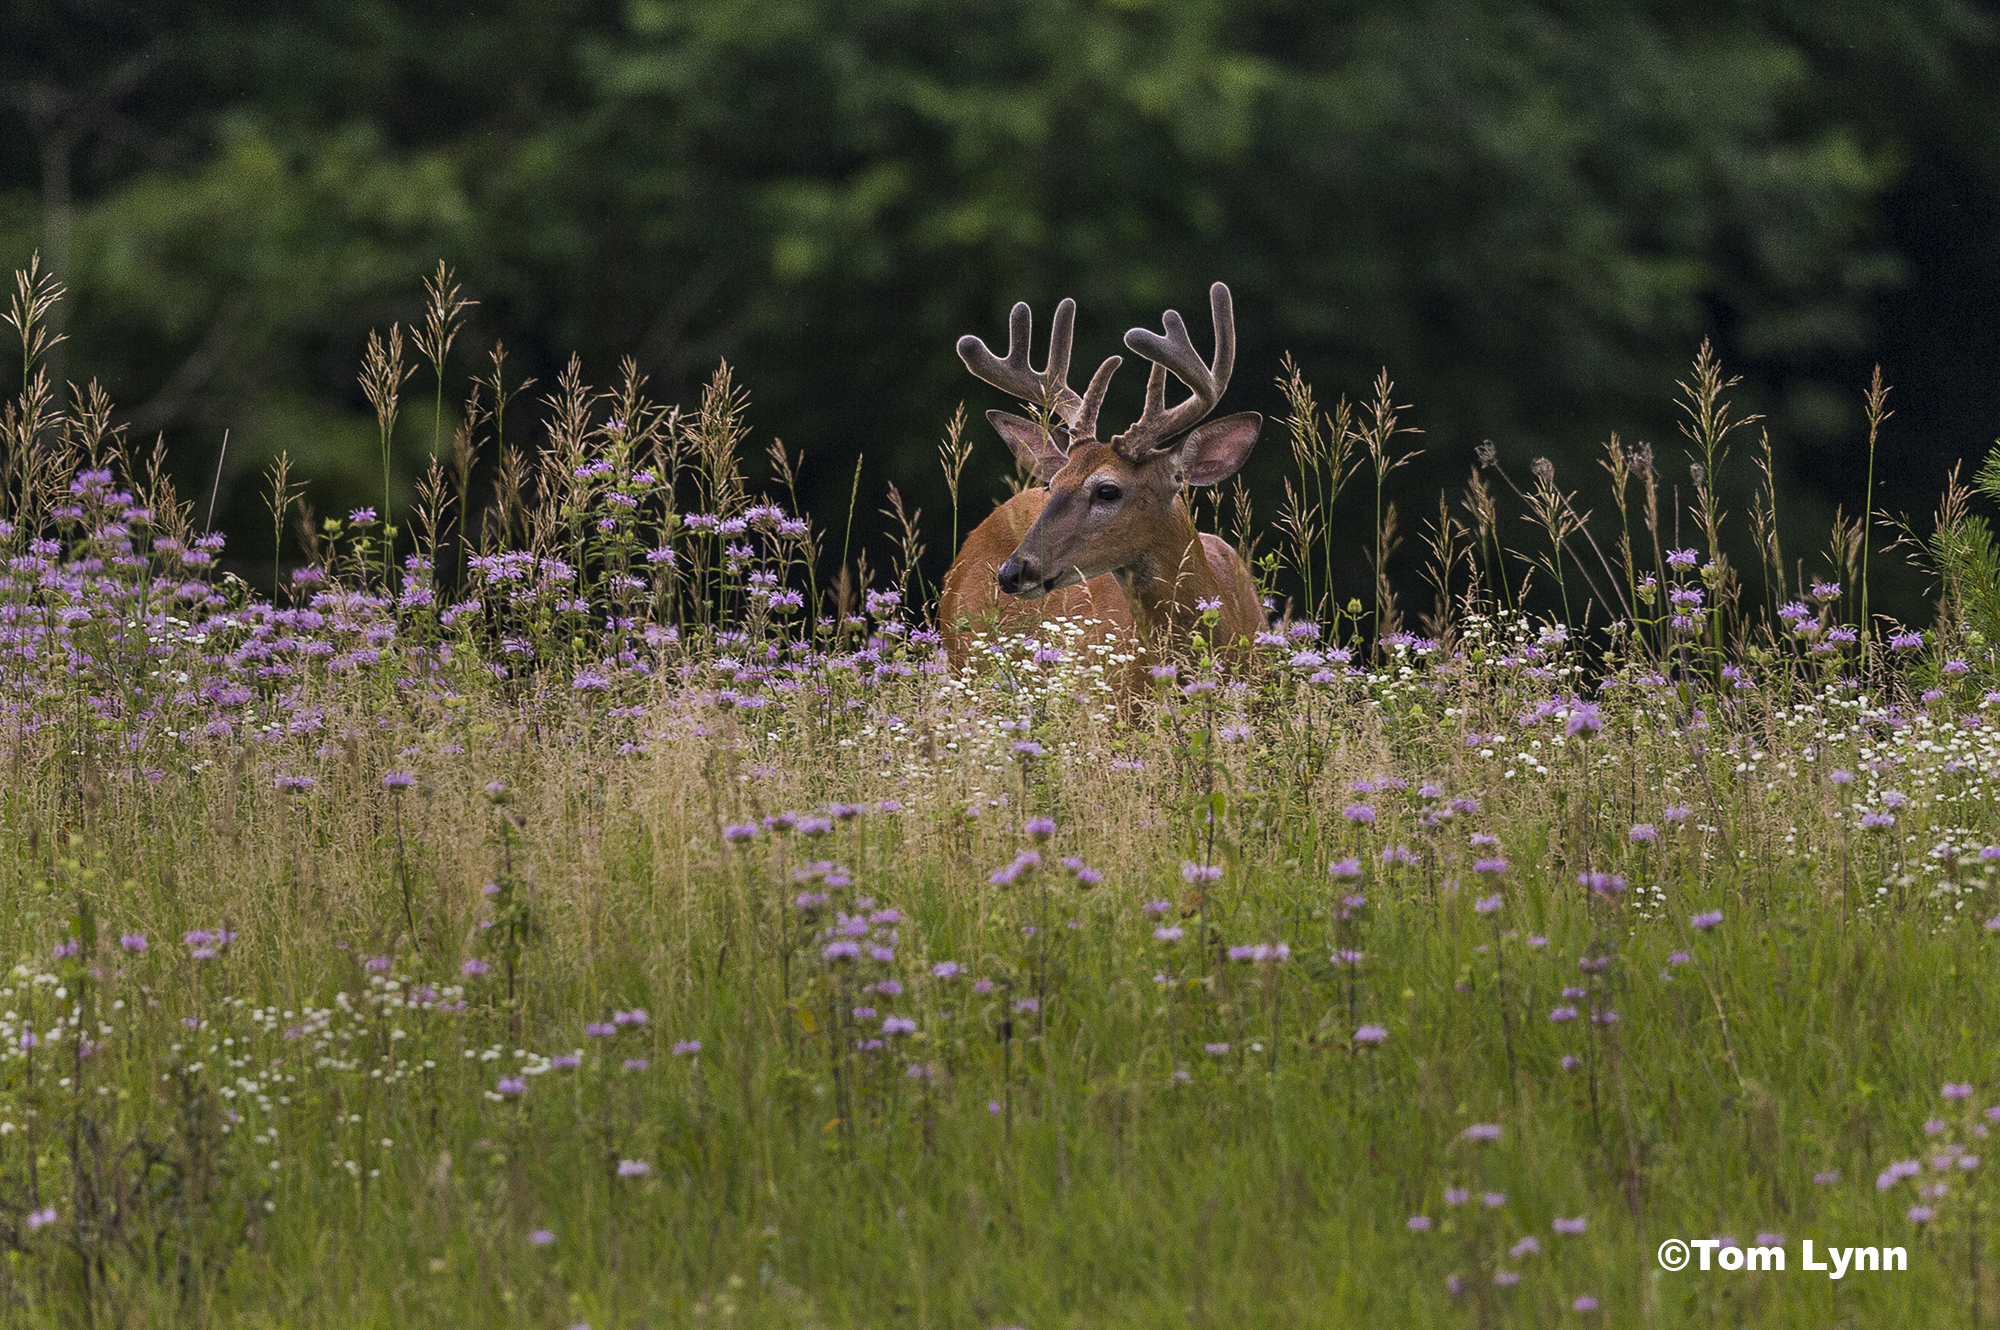 A young buck standing in a field of tall grass and wild flowers